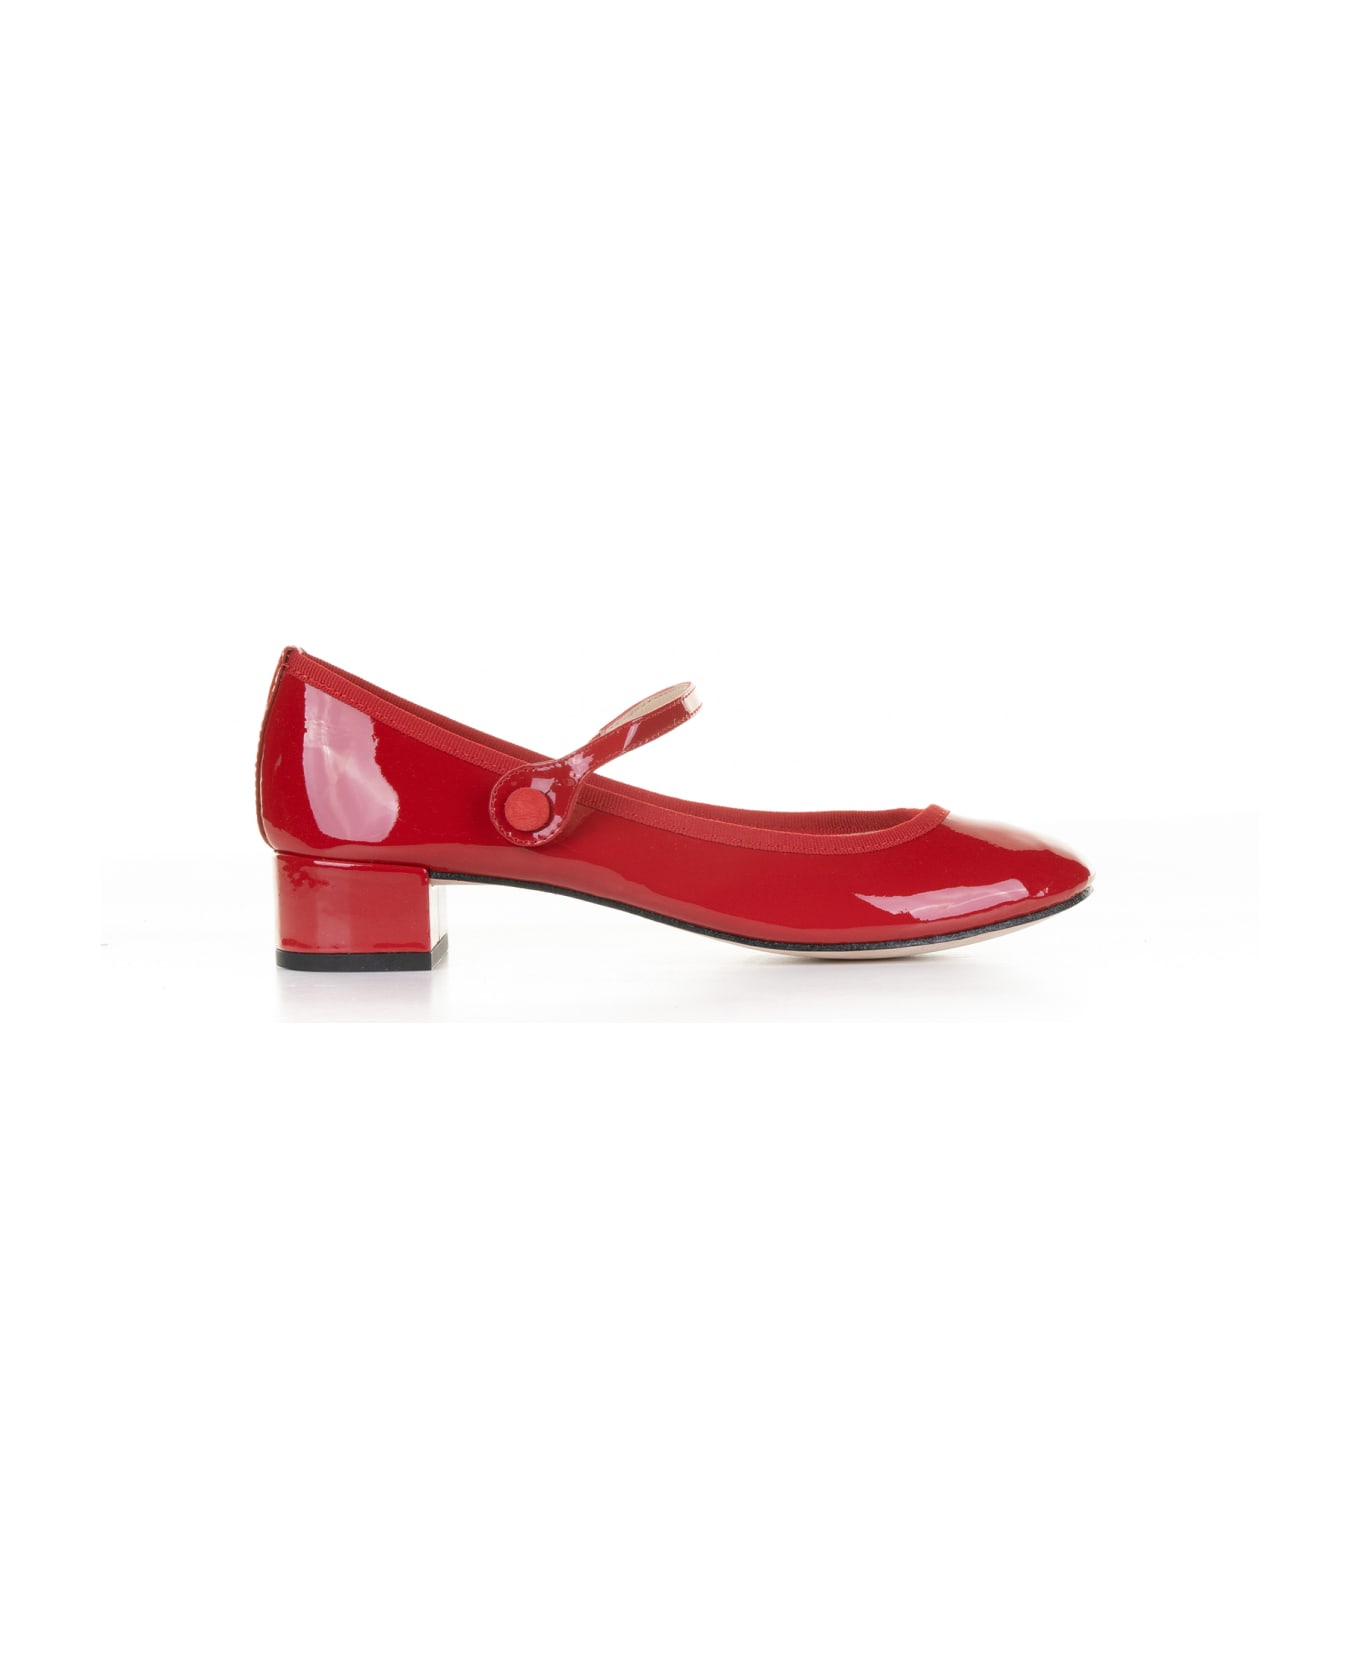 Repetto Ballerina In Shiny Leather With Strap - FLAMME